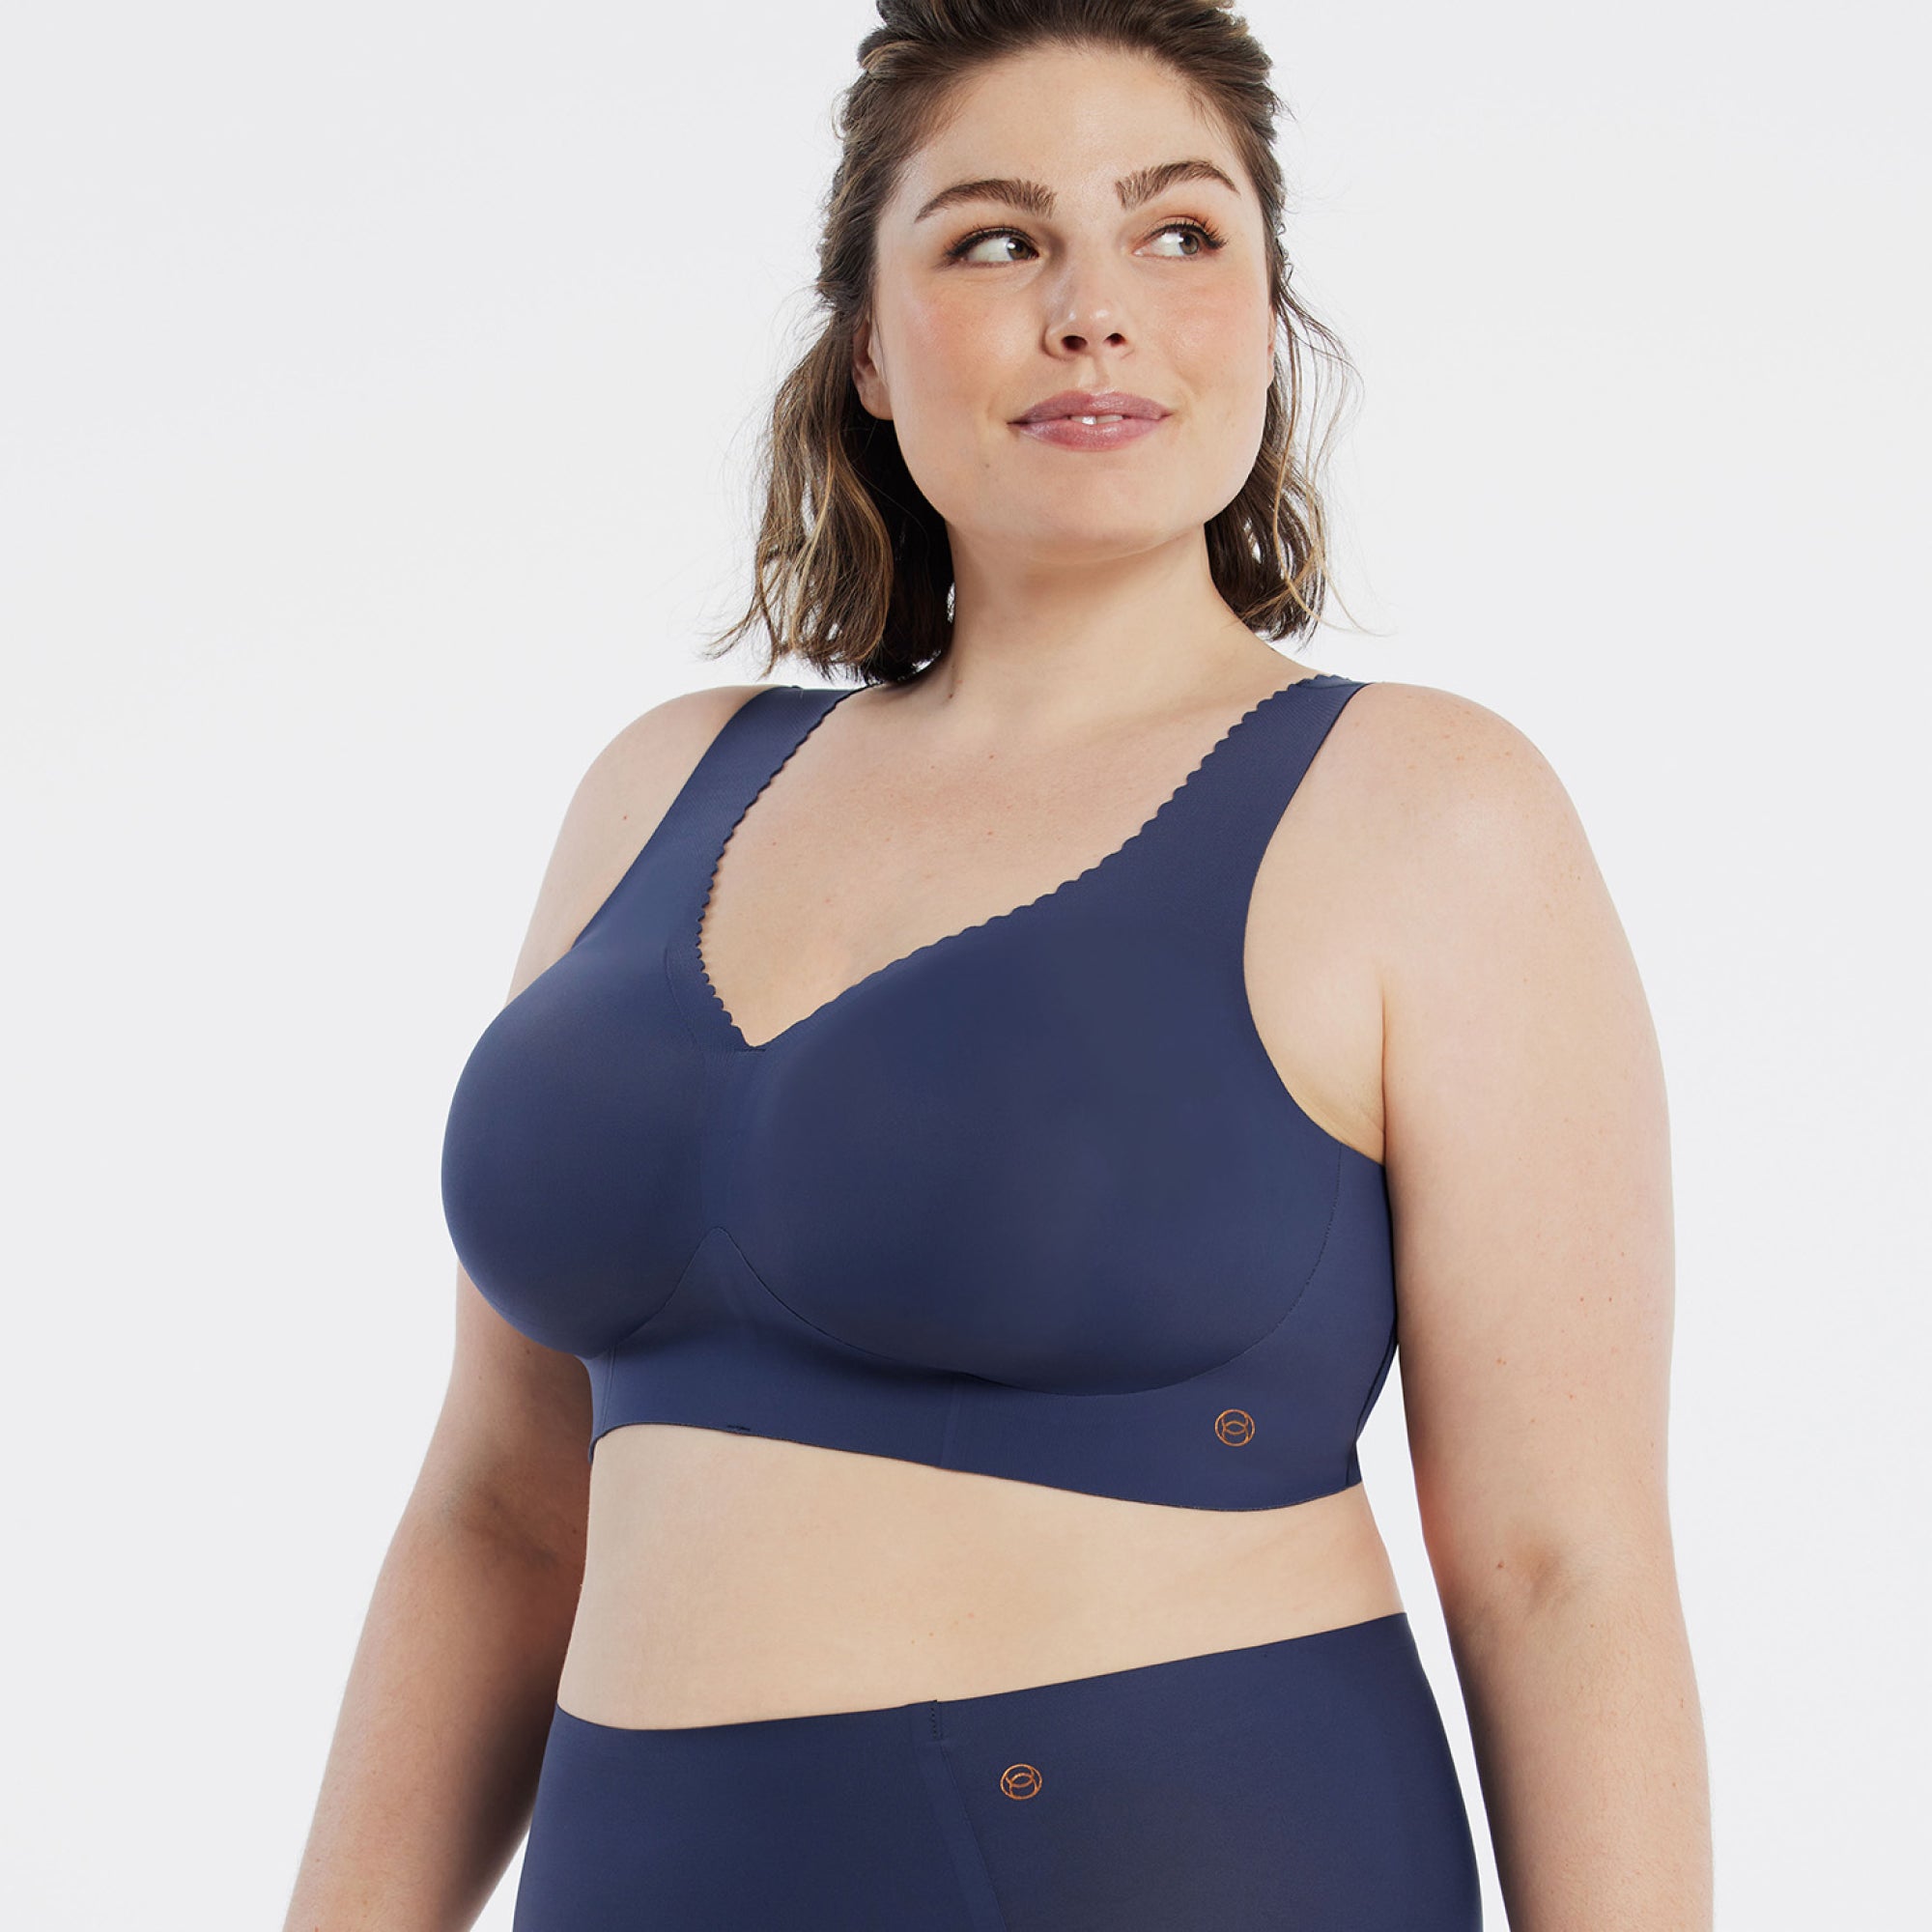 Clothing & Shoes - Socks & Underwear - Bras - Yummie® Evelyn Long Line  Racer Back Bra with Removable Cups - Online Shopping for Canadians